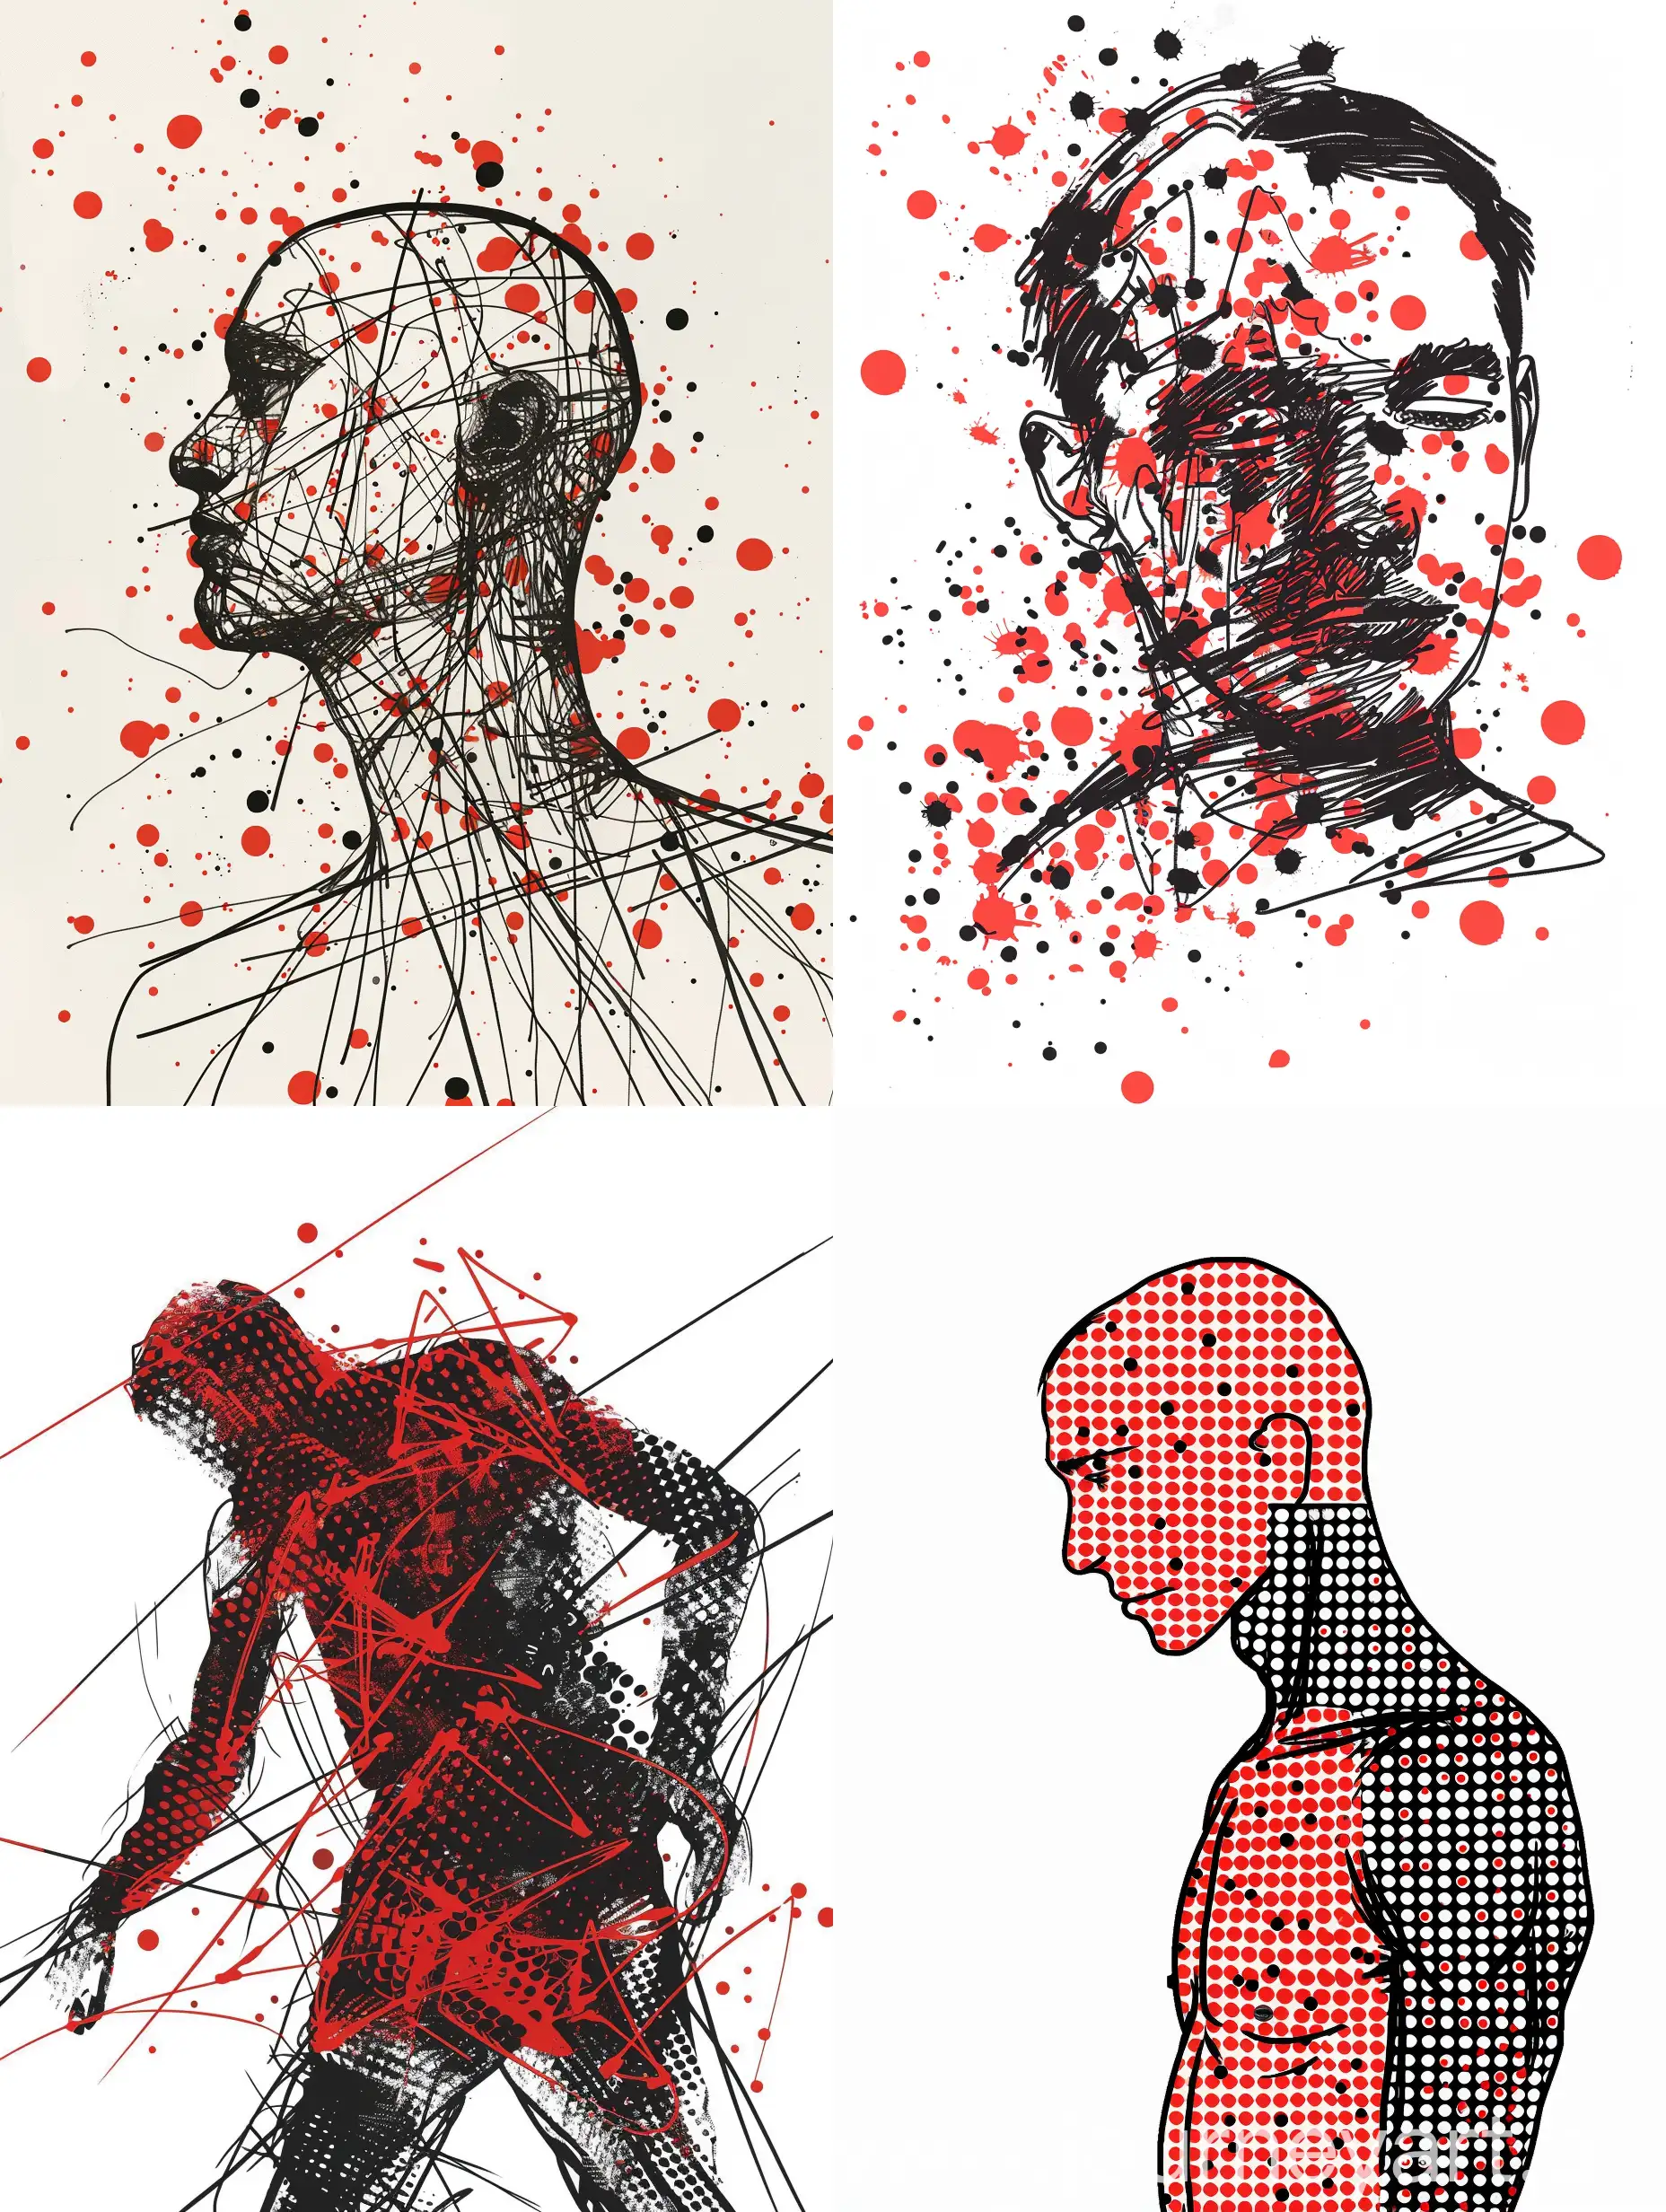 minimalist black line art fuse with trash polka red of man, on a white background

